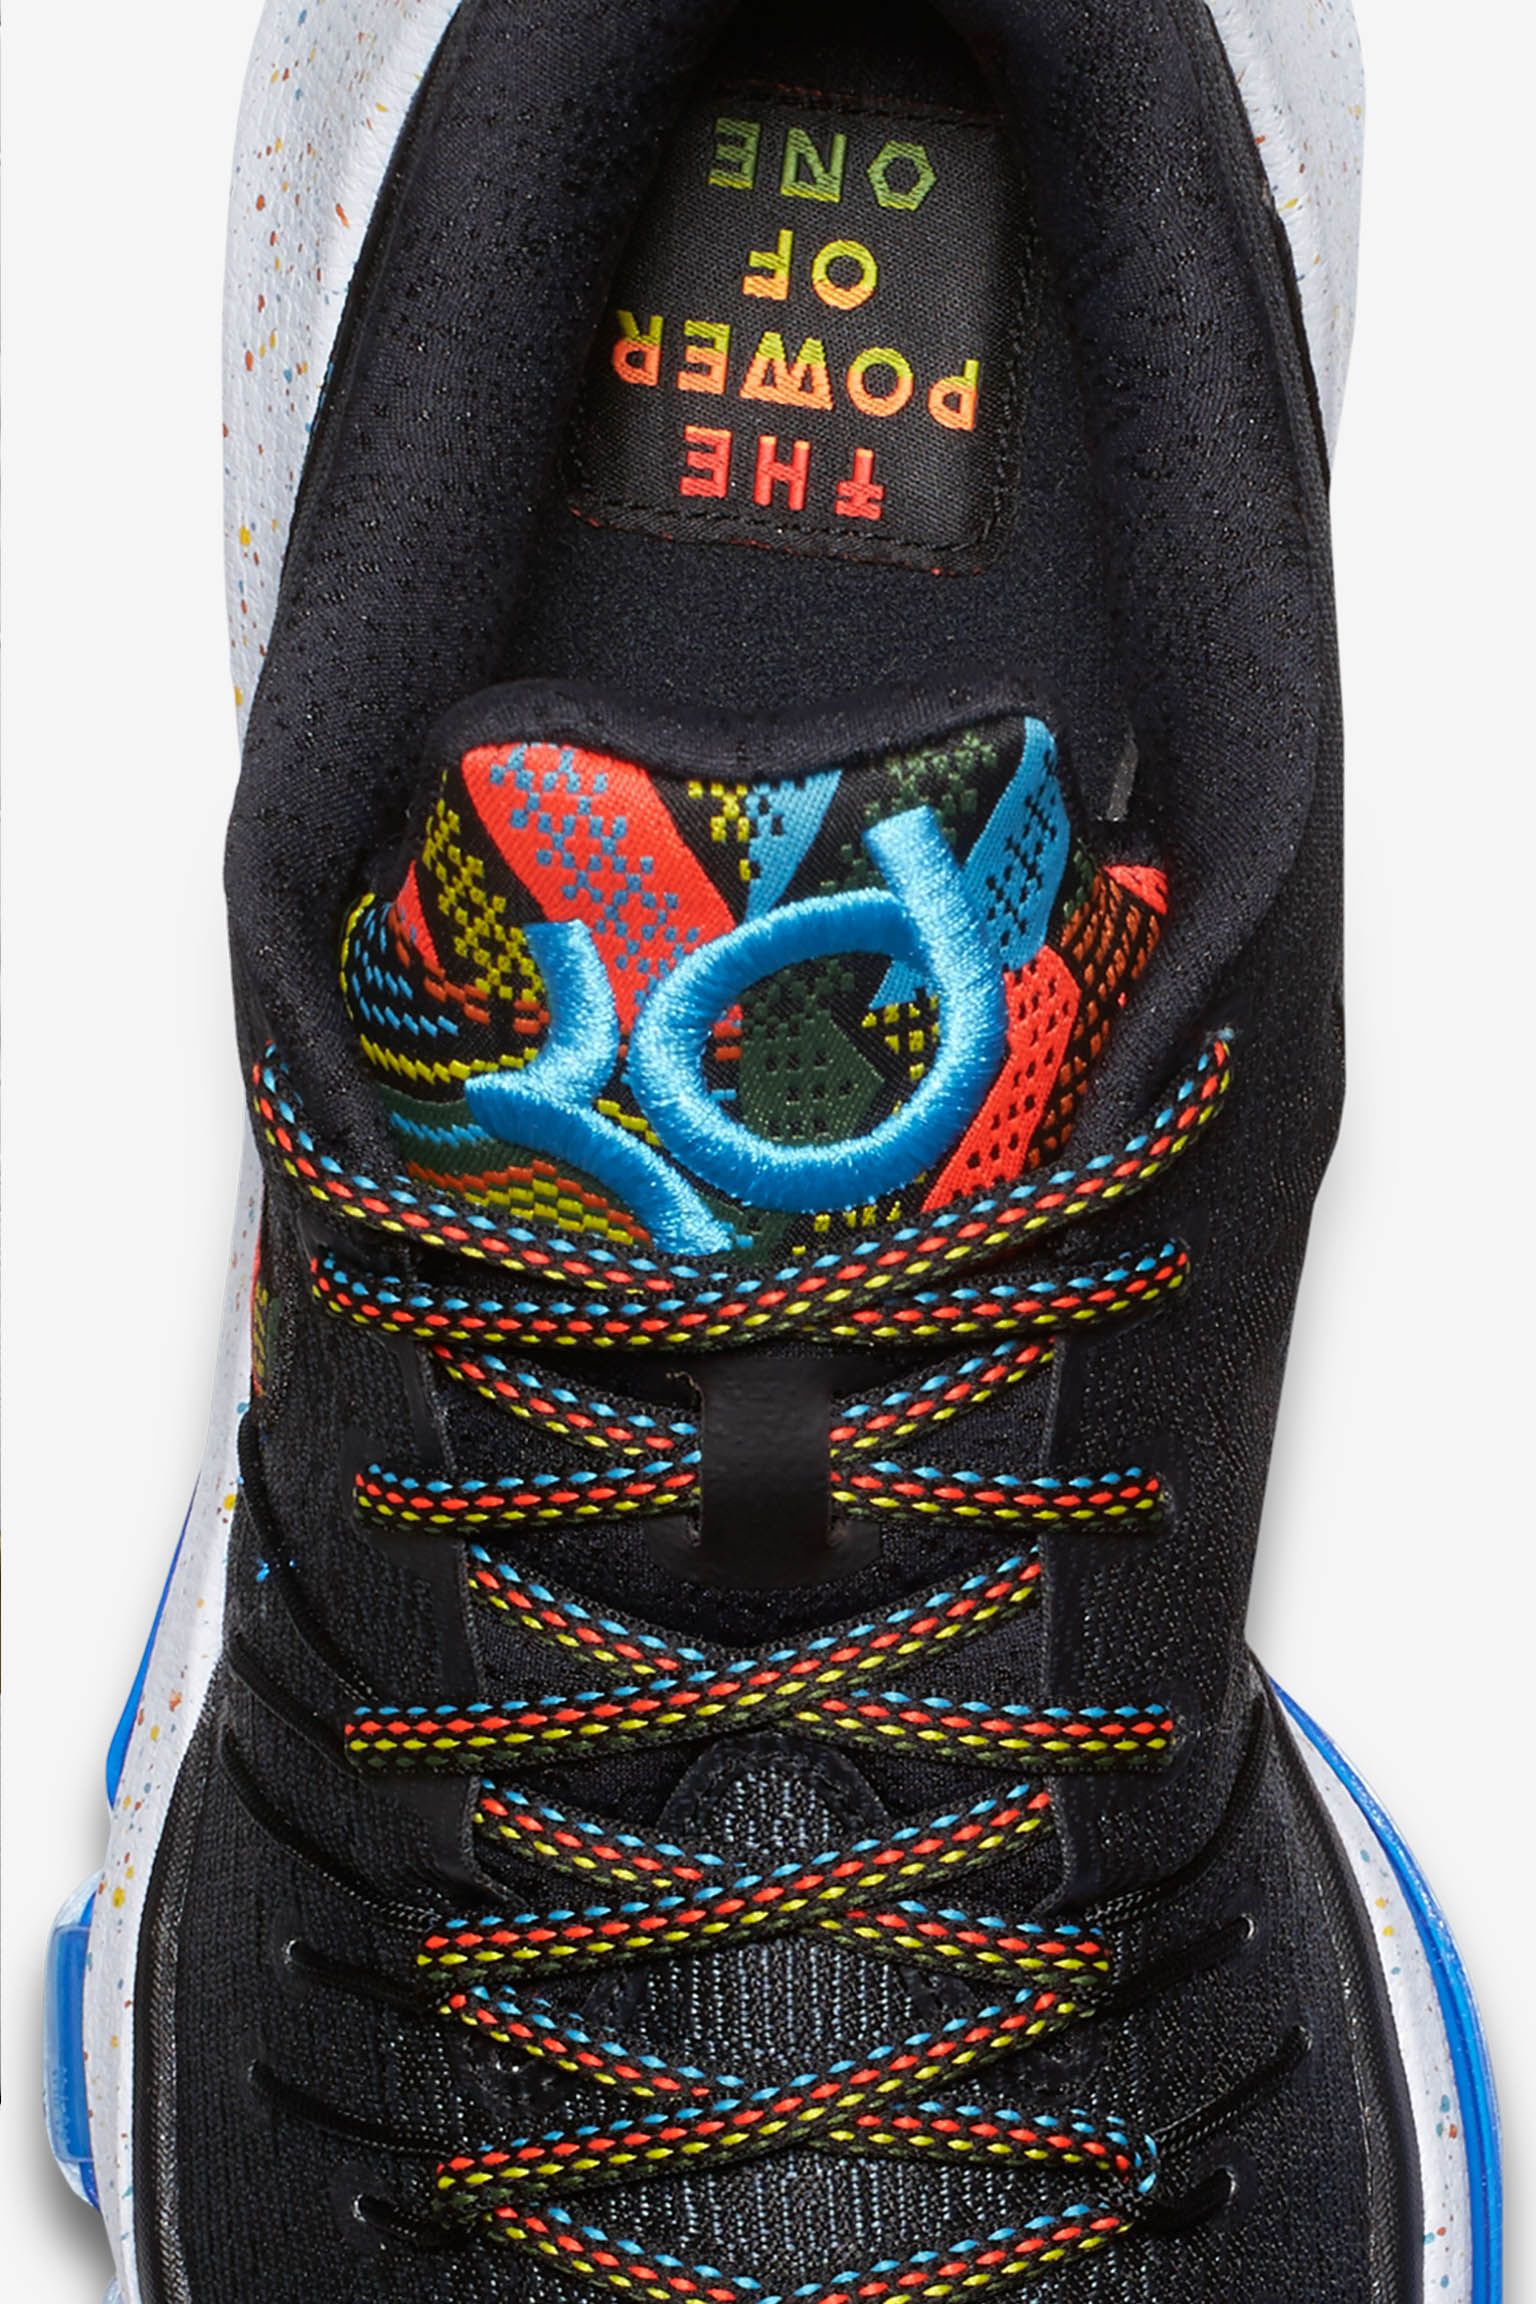 what nike store carries the kd 8 bhm kids